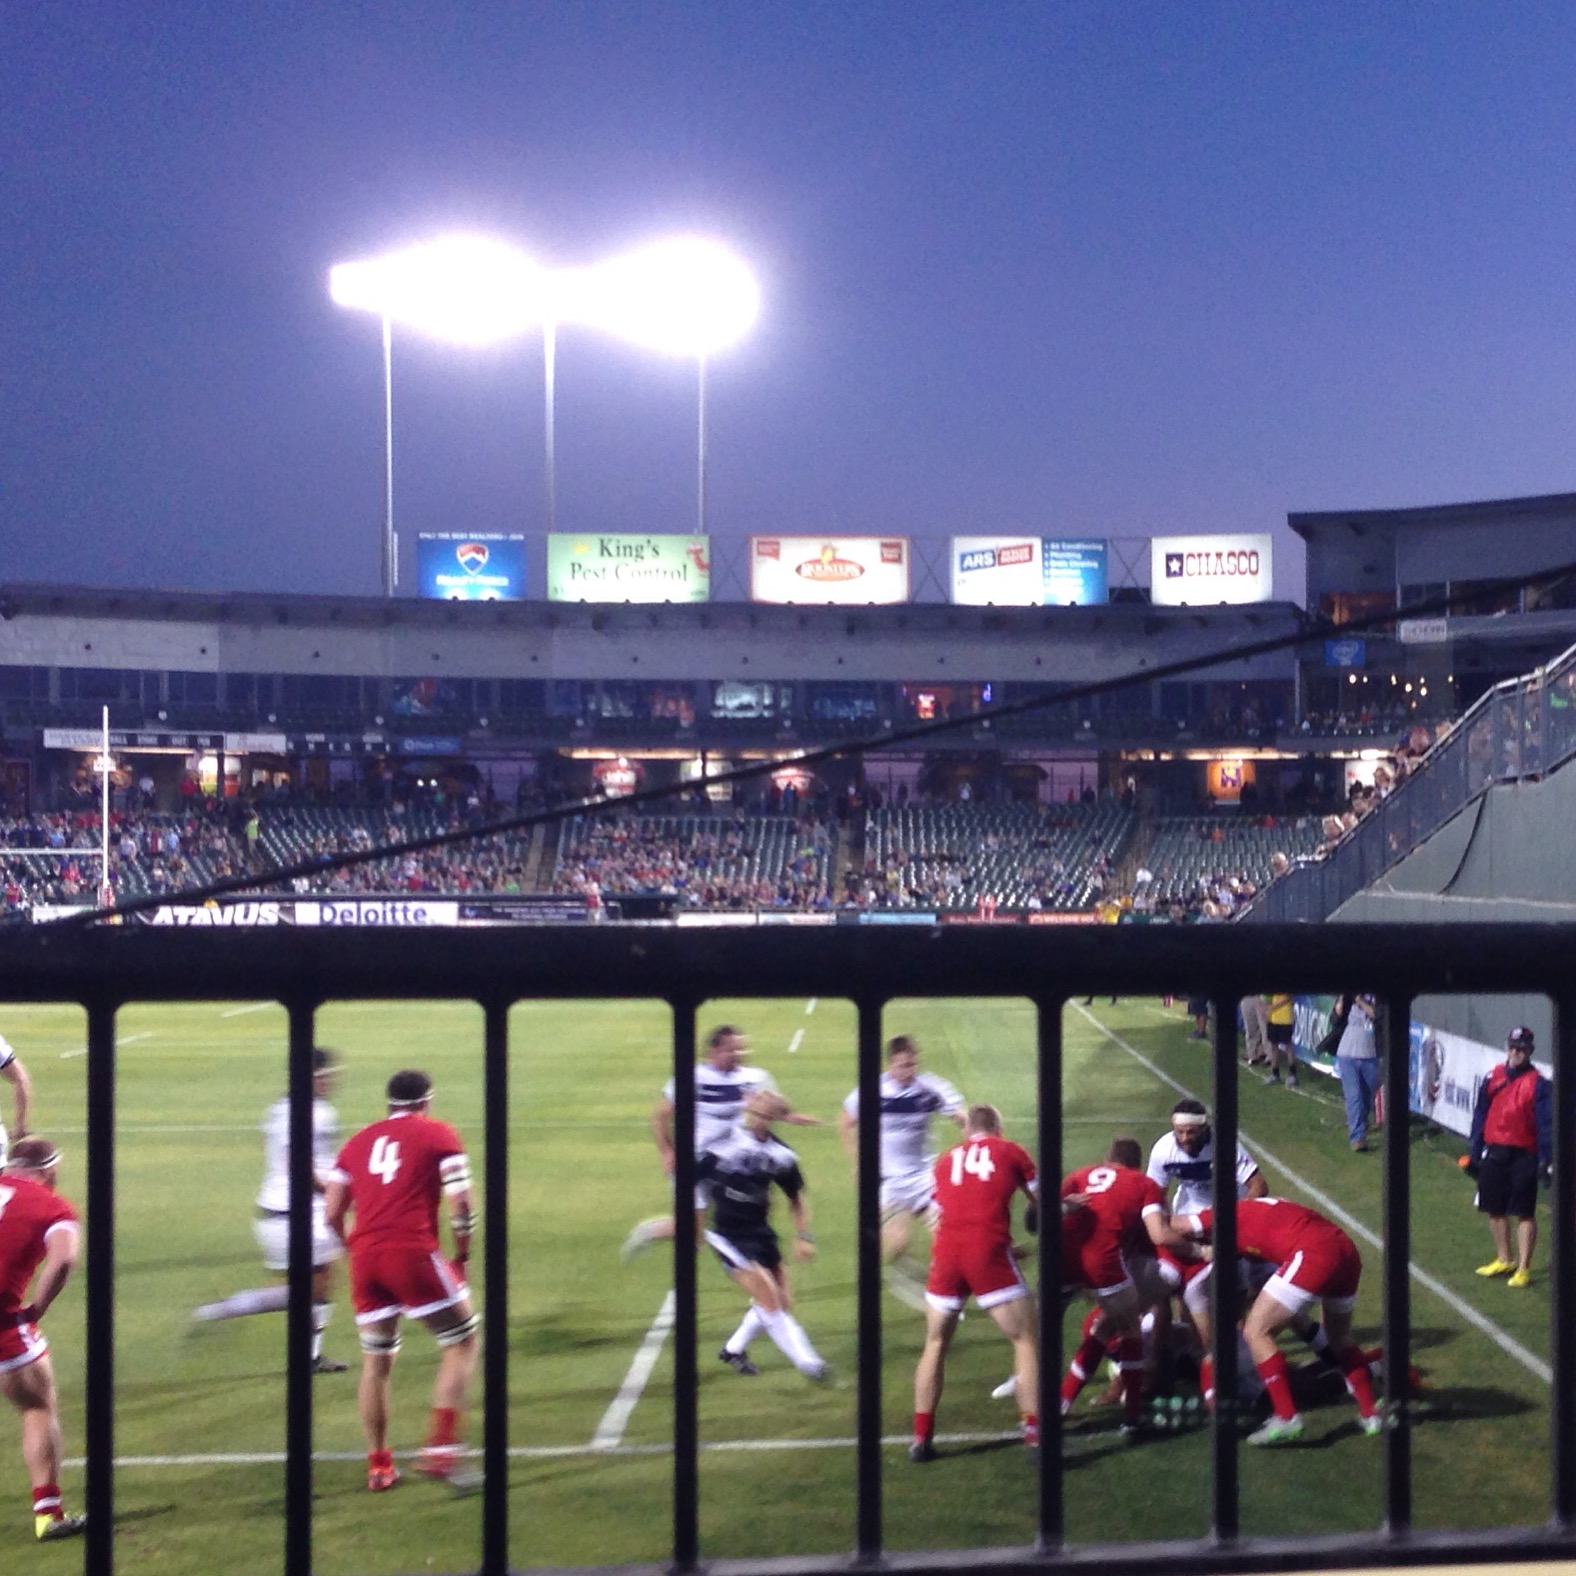 Rugby at the Dell Diamond with some of my favorite people. This was such a fun melding of two entertaining sports experiences.